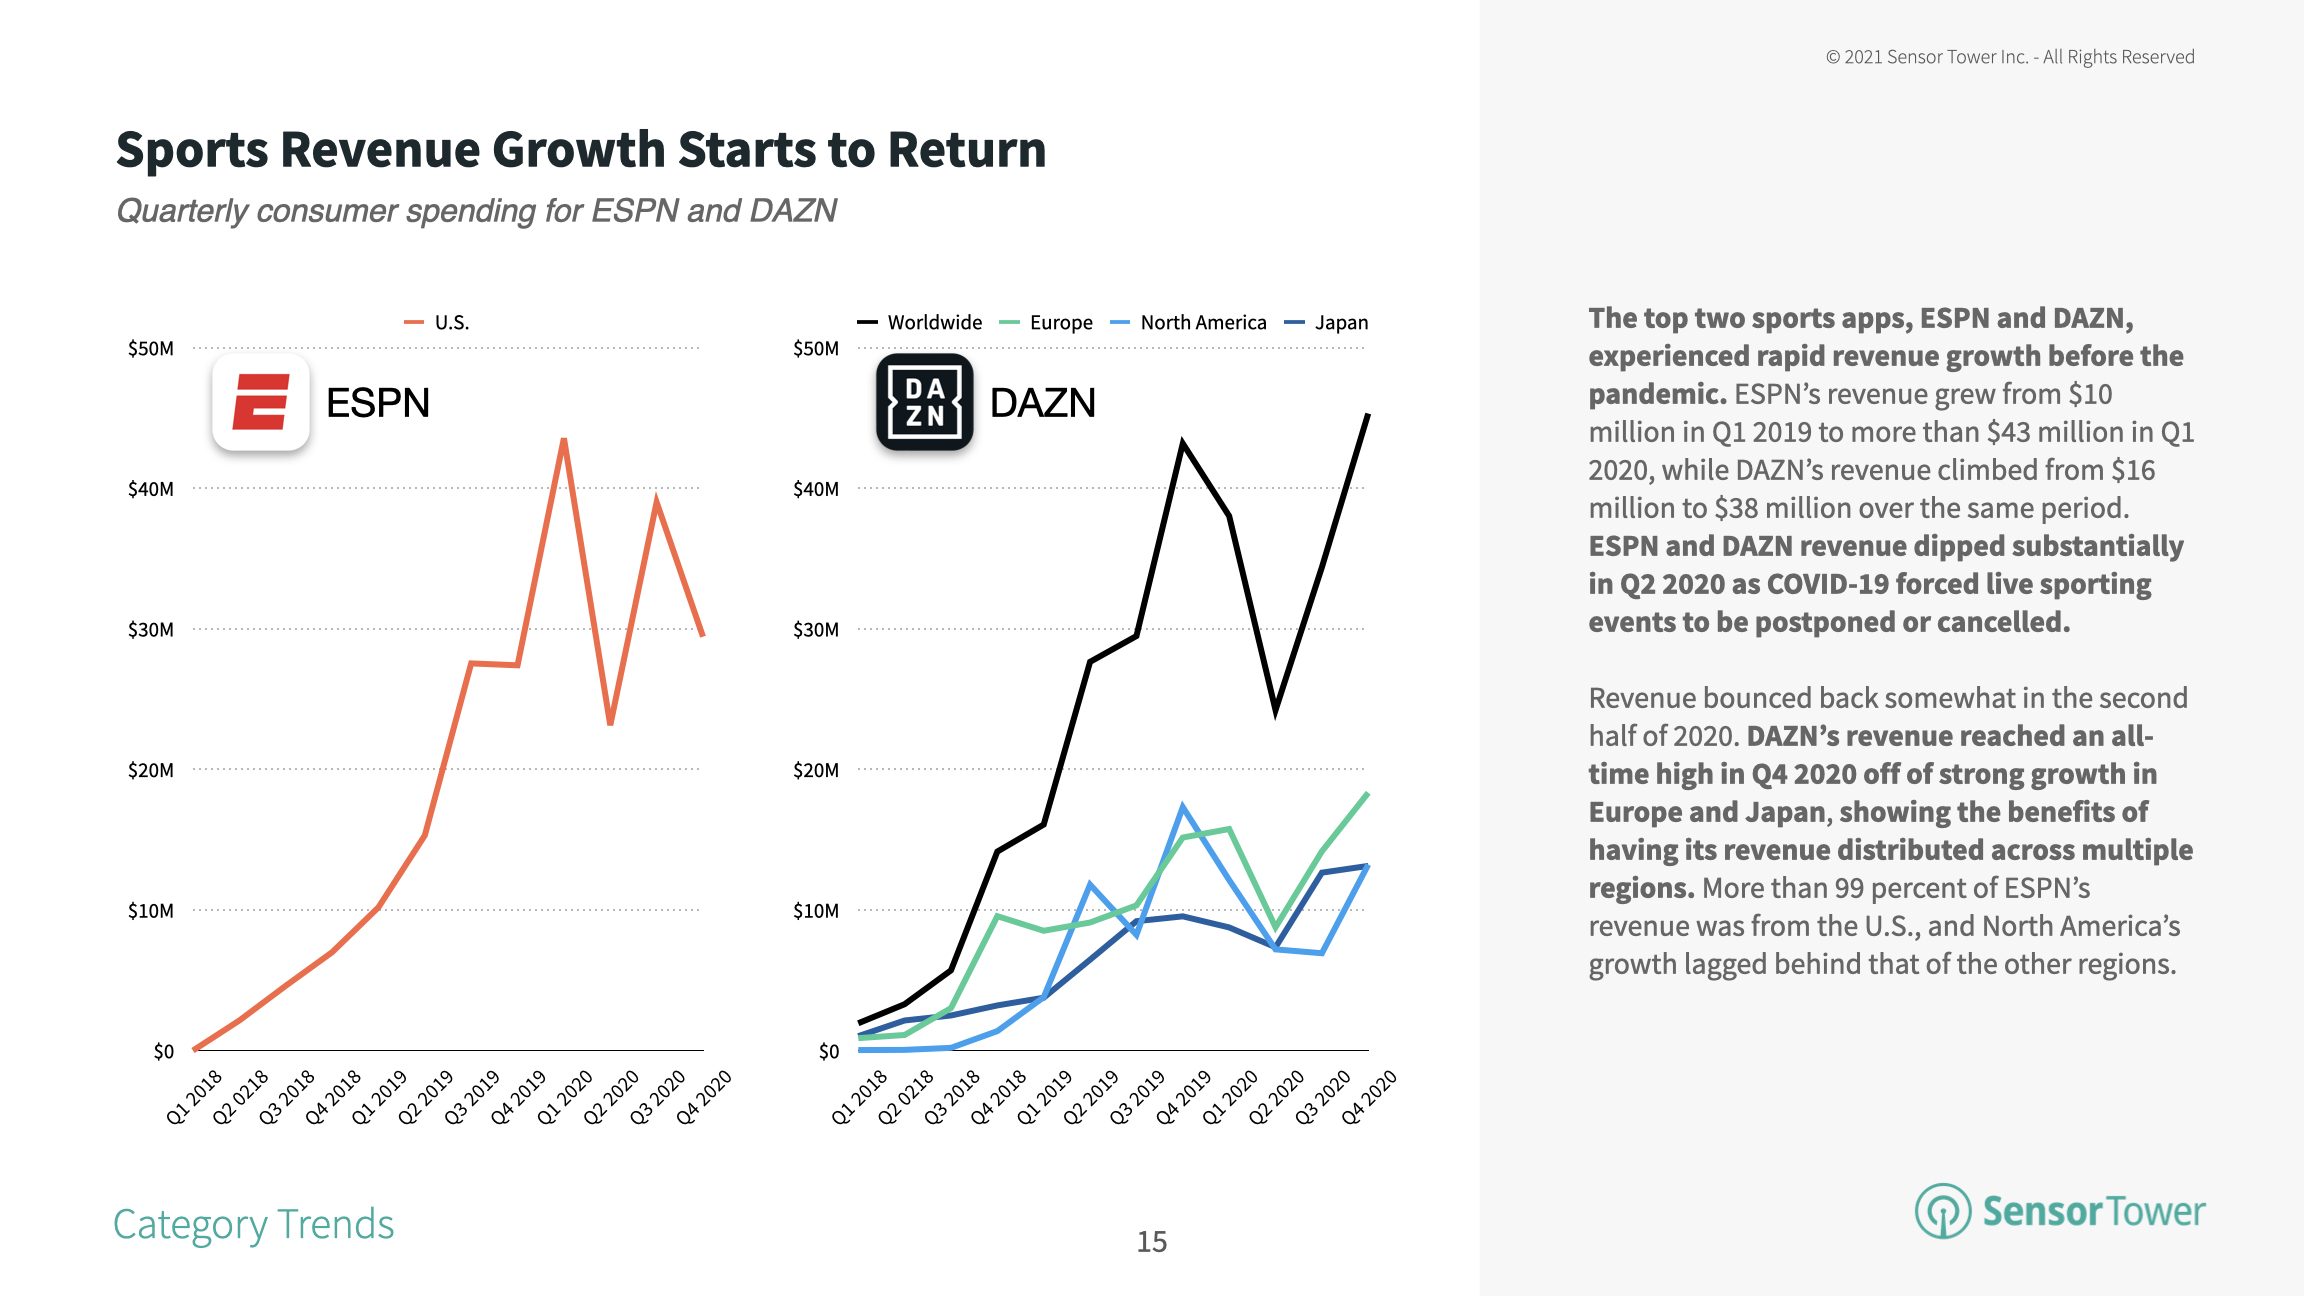 The top sports app DAZN is experiencing a rebound thanks to growth in Europe and Japan.